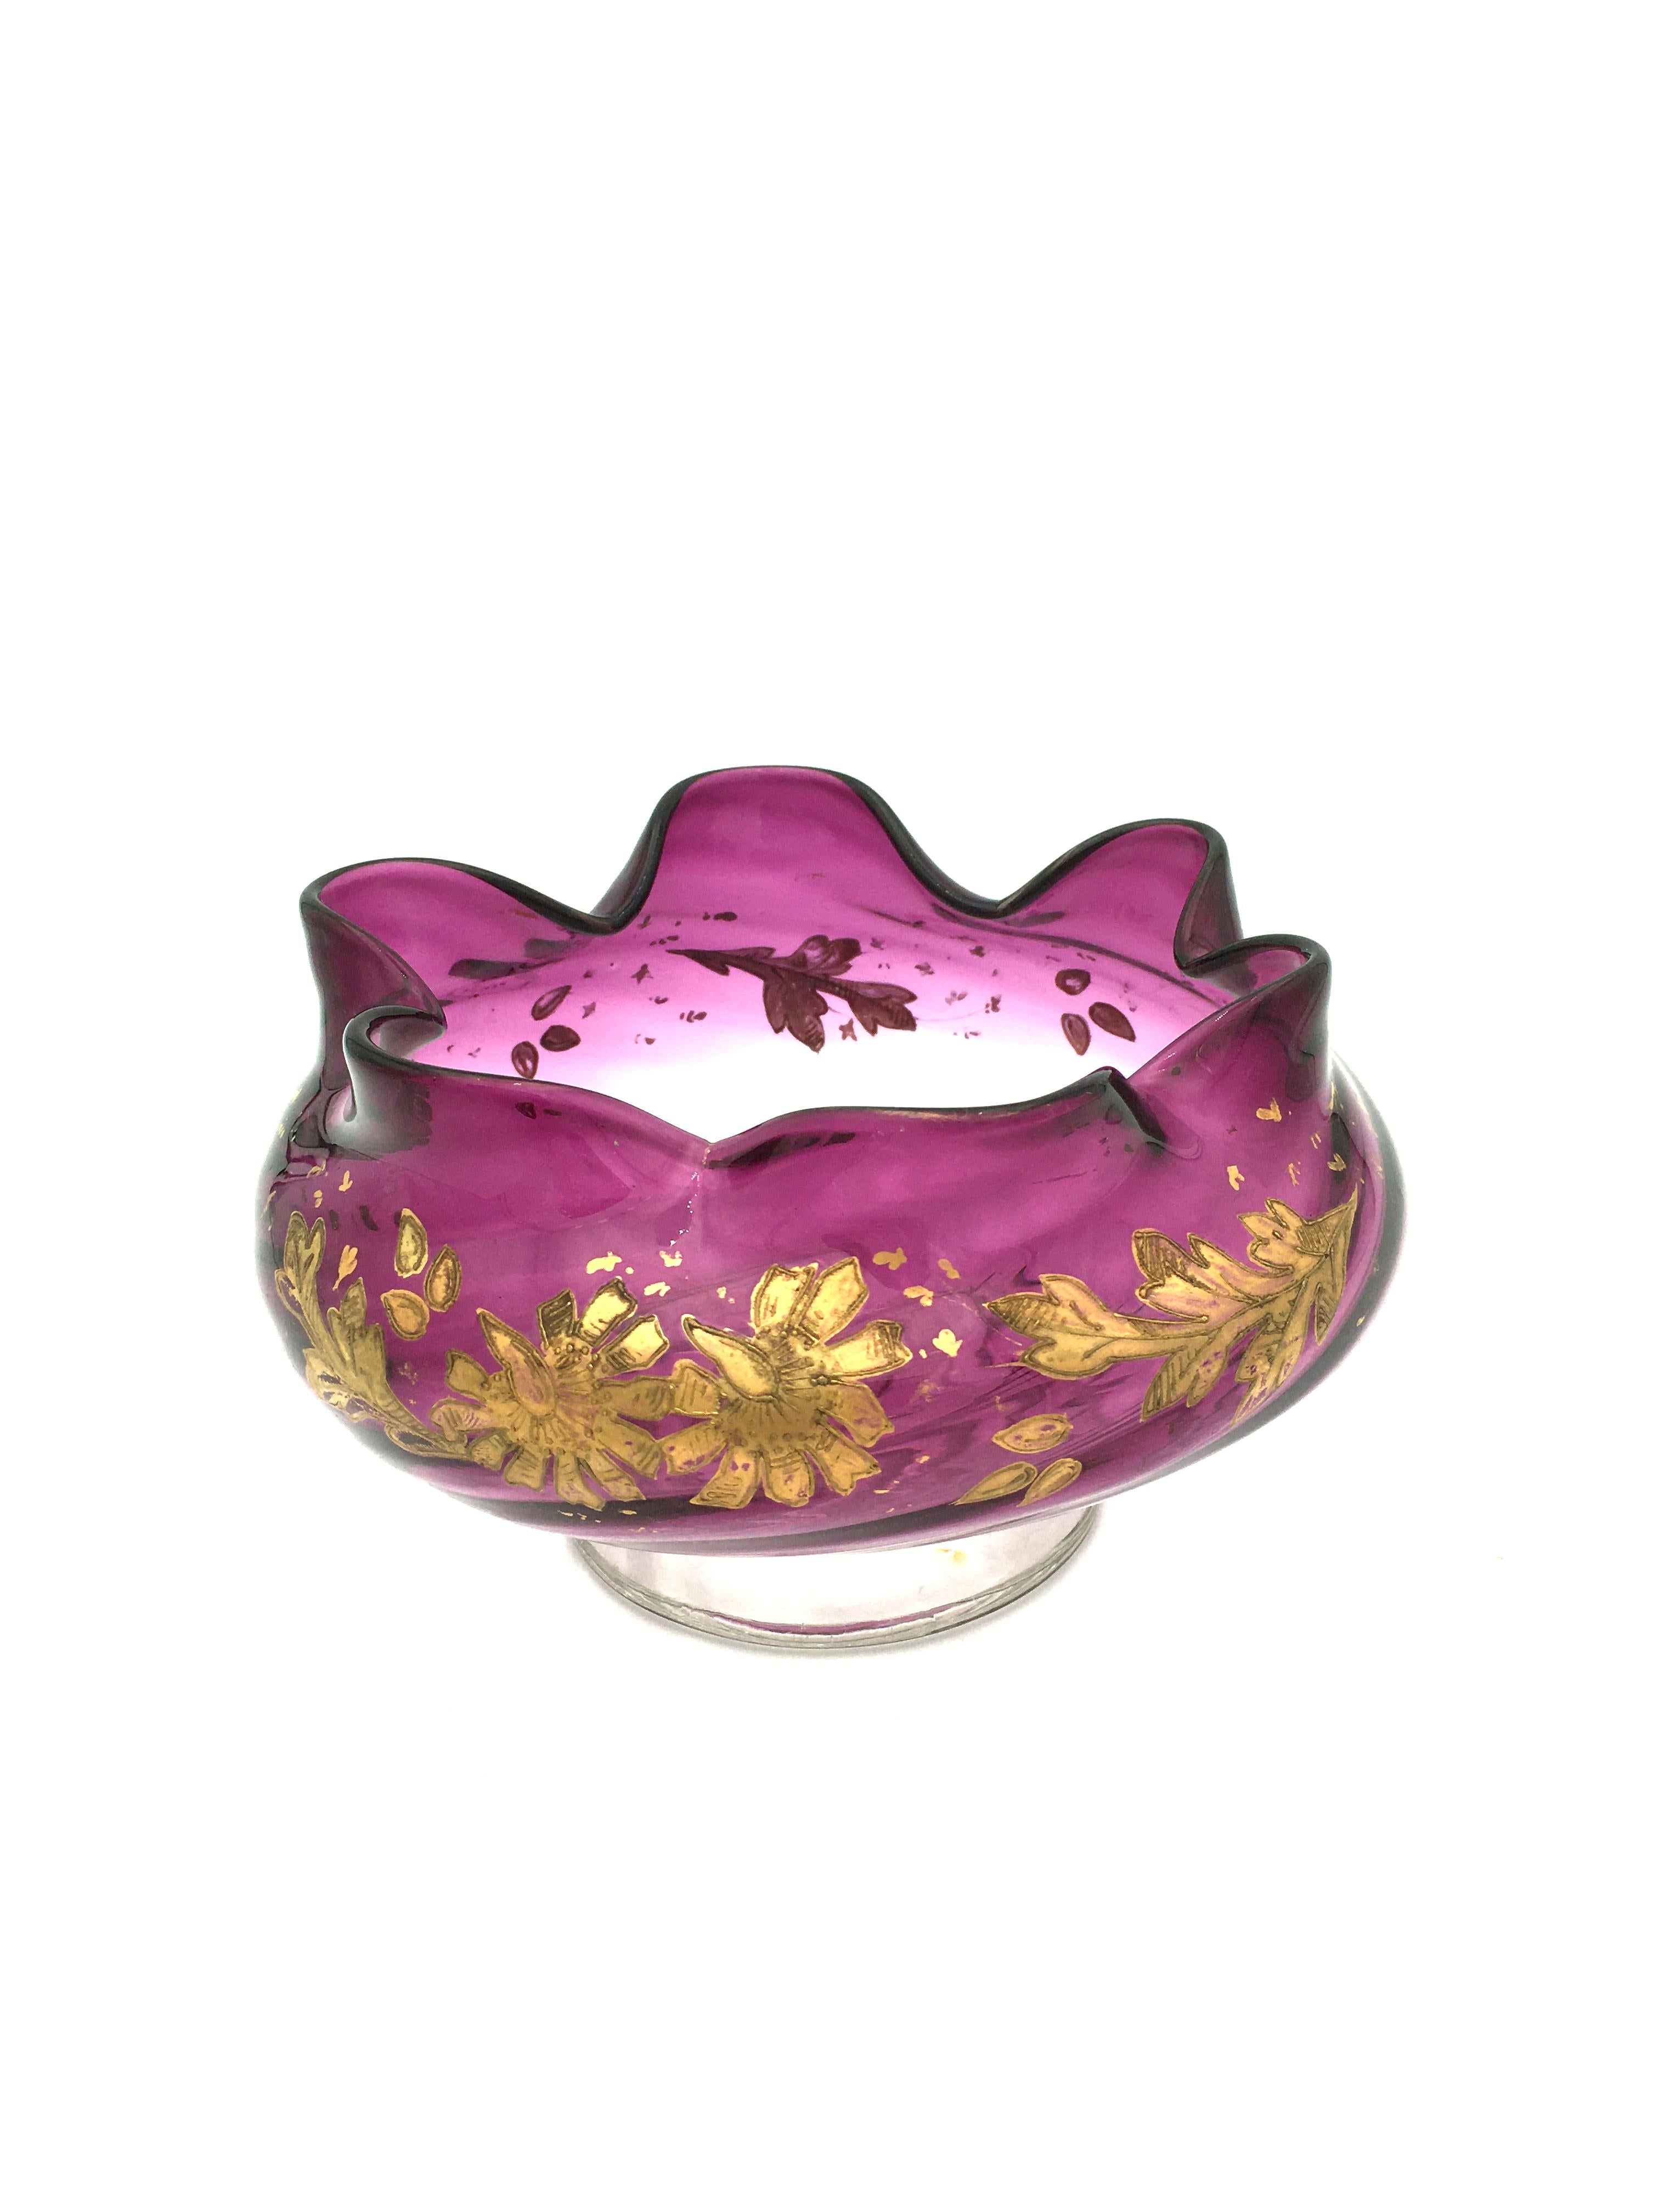 Art Nouveau spiral purple lead crystal bowl with guilt flowers decoration.
France 
End of 19th-beginning of the 20th century.
  